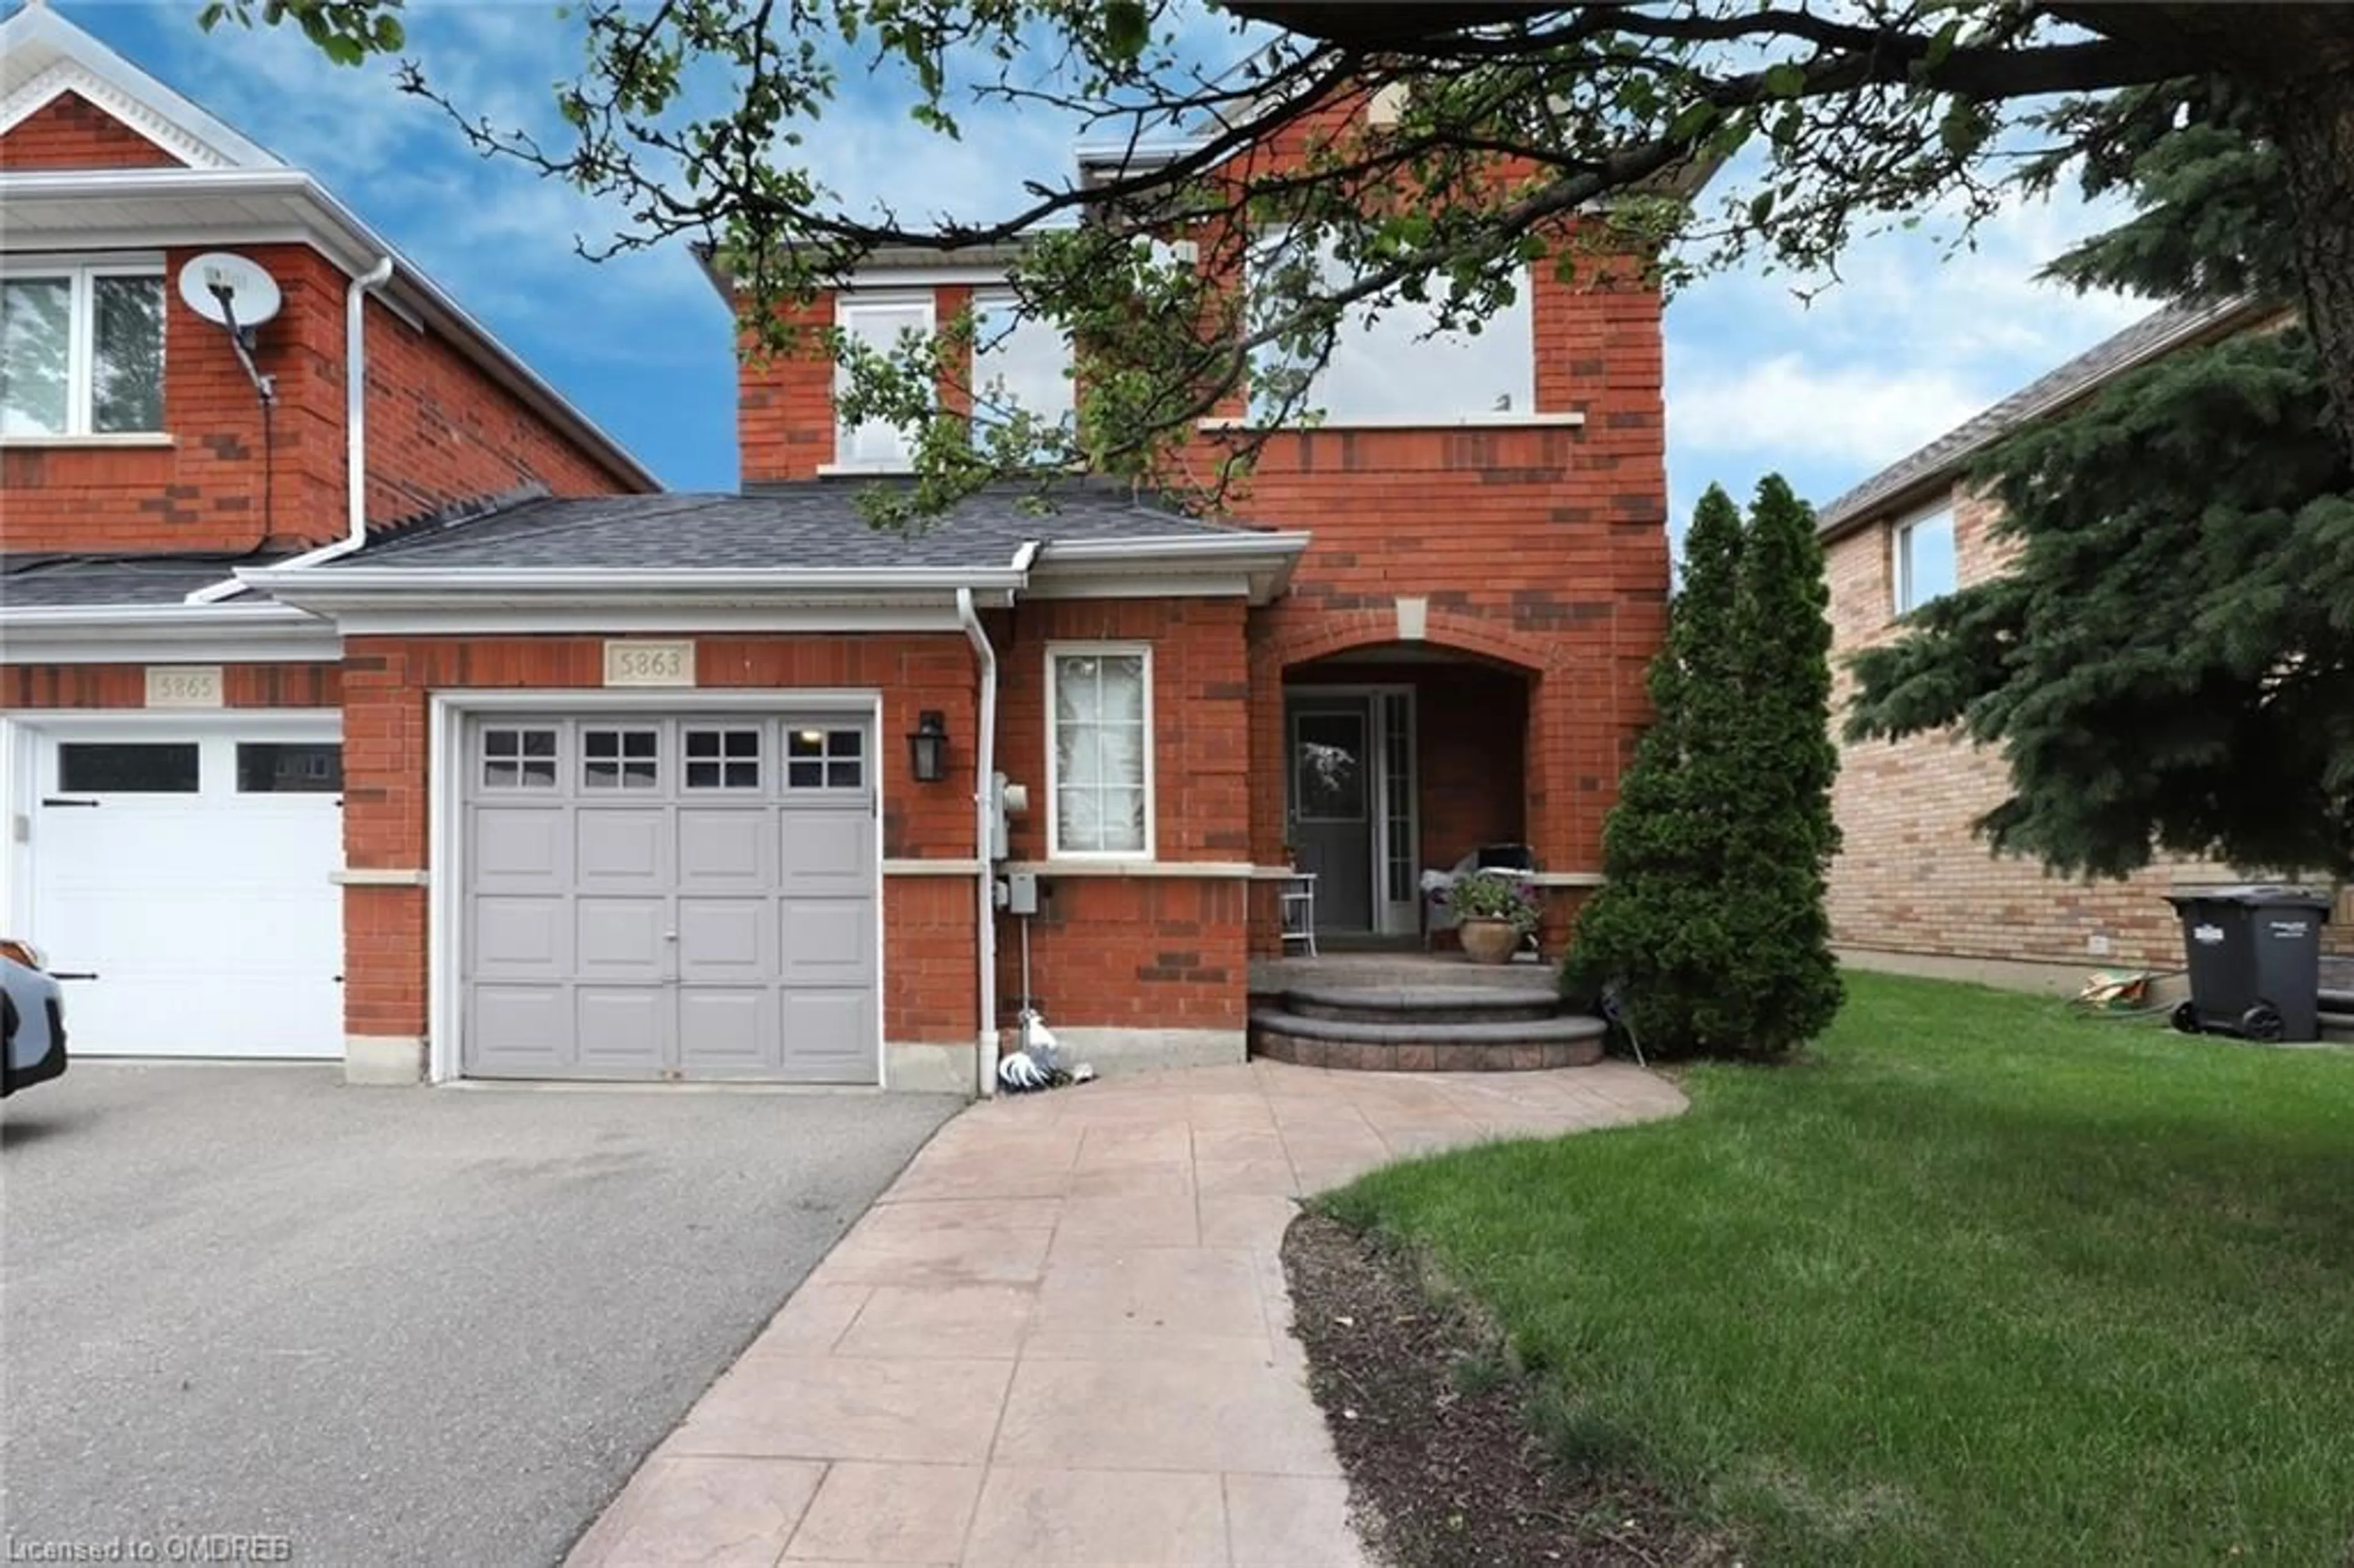 Home with brick exterior material for 5863 Chalfont Cres, Mississauga Ontario L5M 6K4